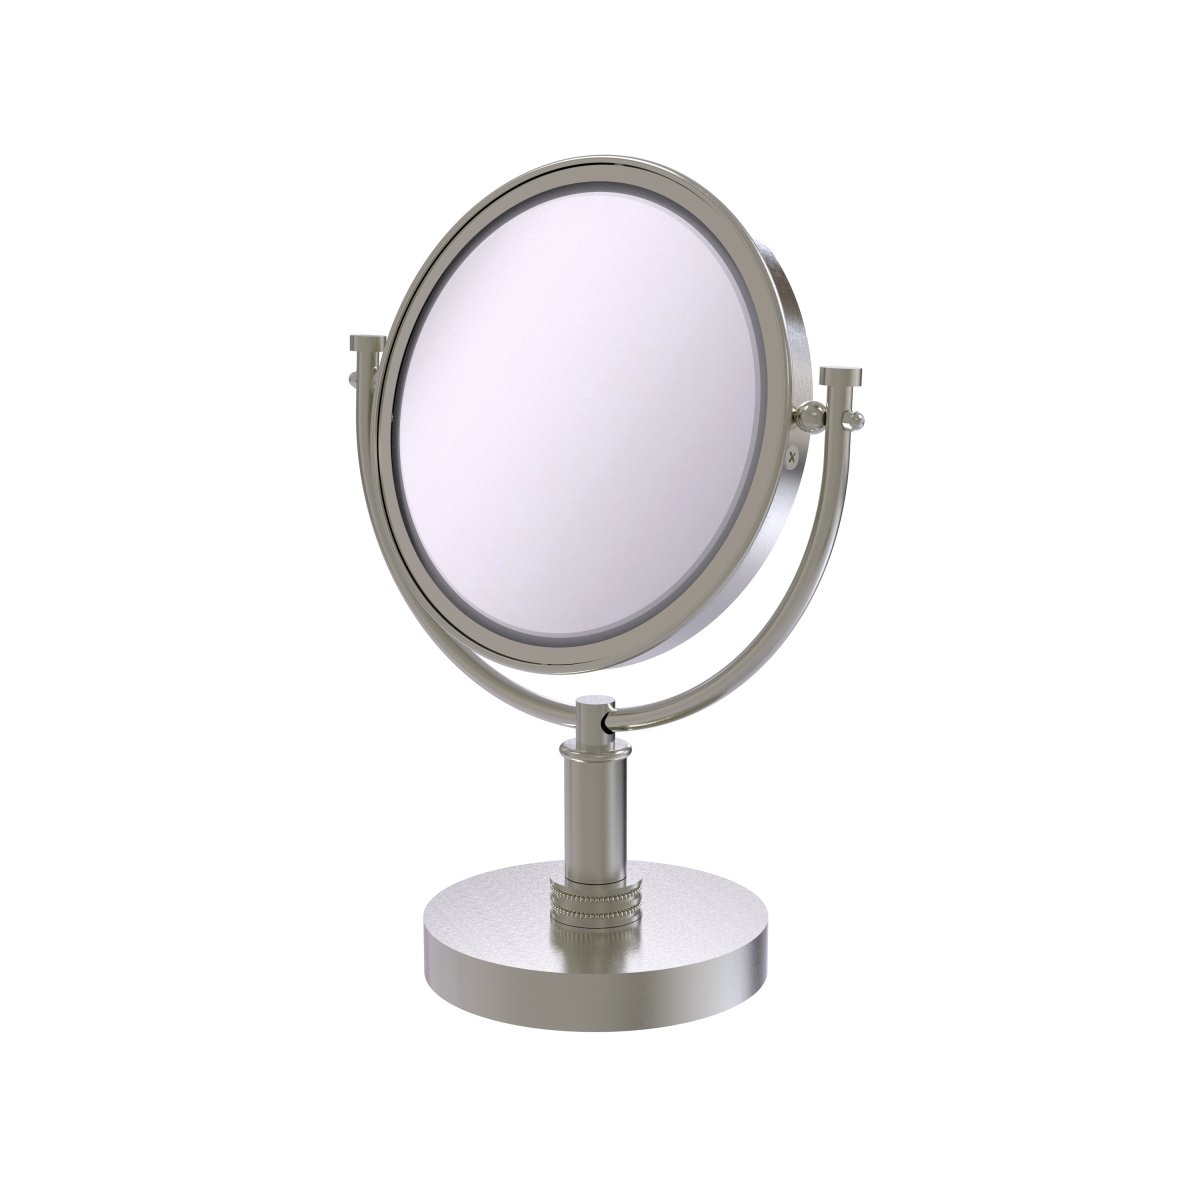 Picture of Allied Brass DM-4D-2X-SN 8 in. Vanity Top Make-Up Mirror 2X Magnification, Satin Nickel - 15 x 8 x 8 in.